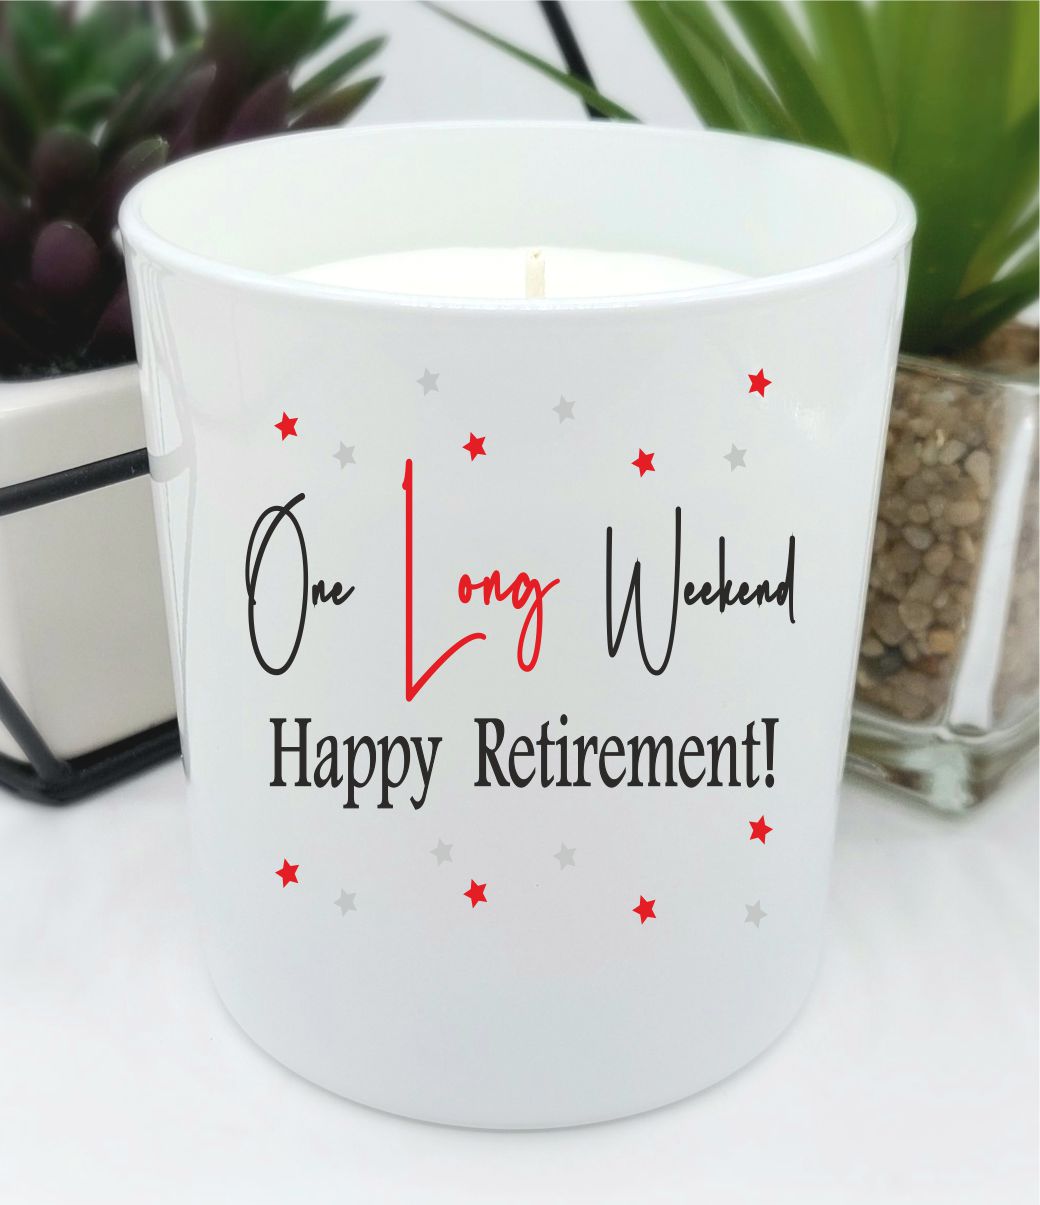 Retirement scented candle gift